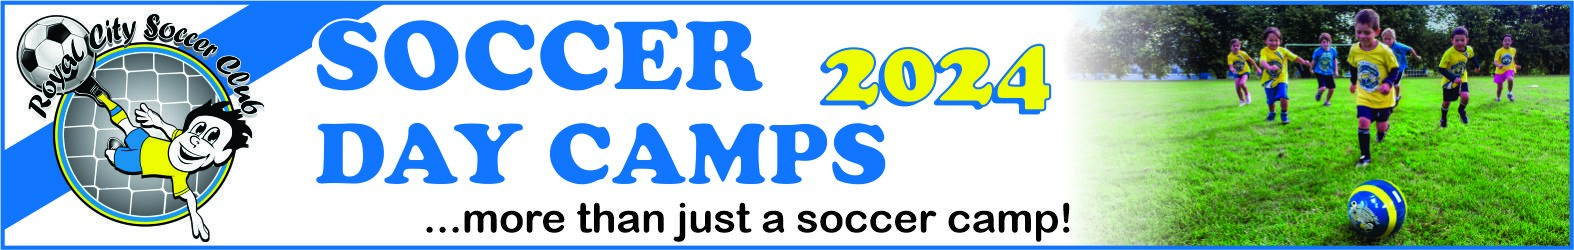 Poster titled Soccer Camp Days with photo of children playing soccer